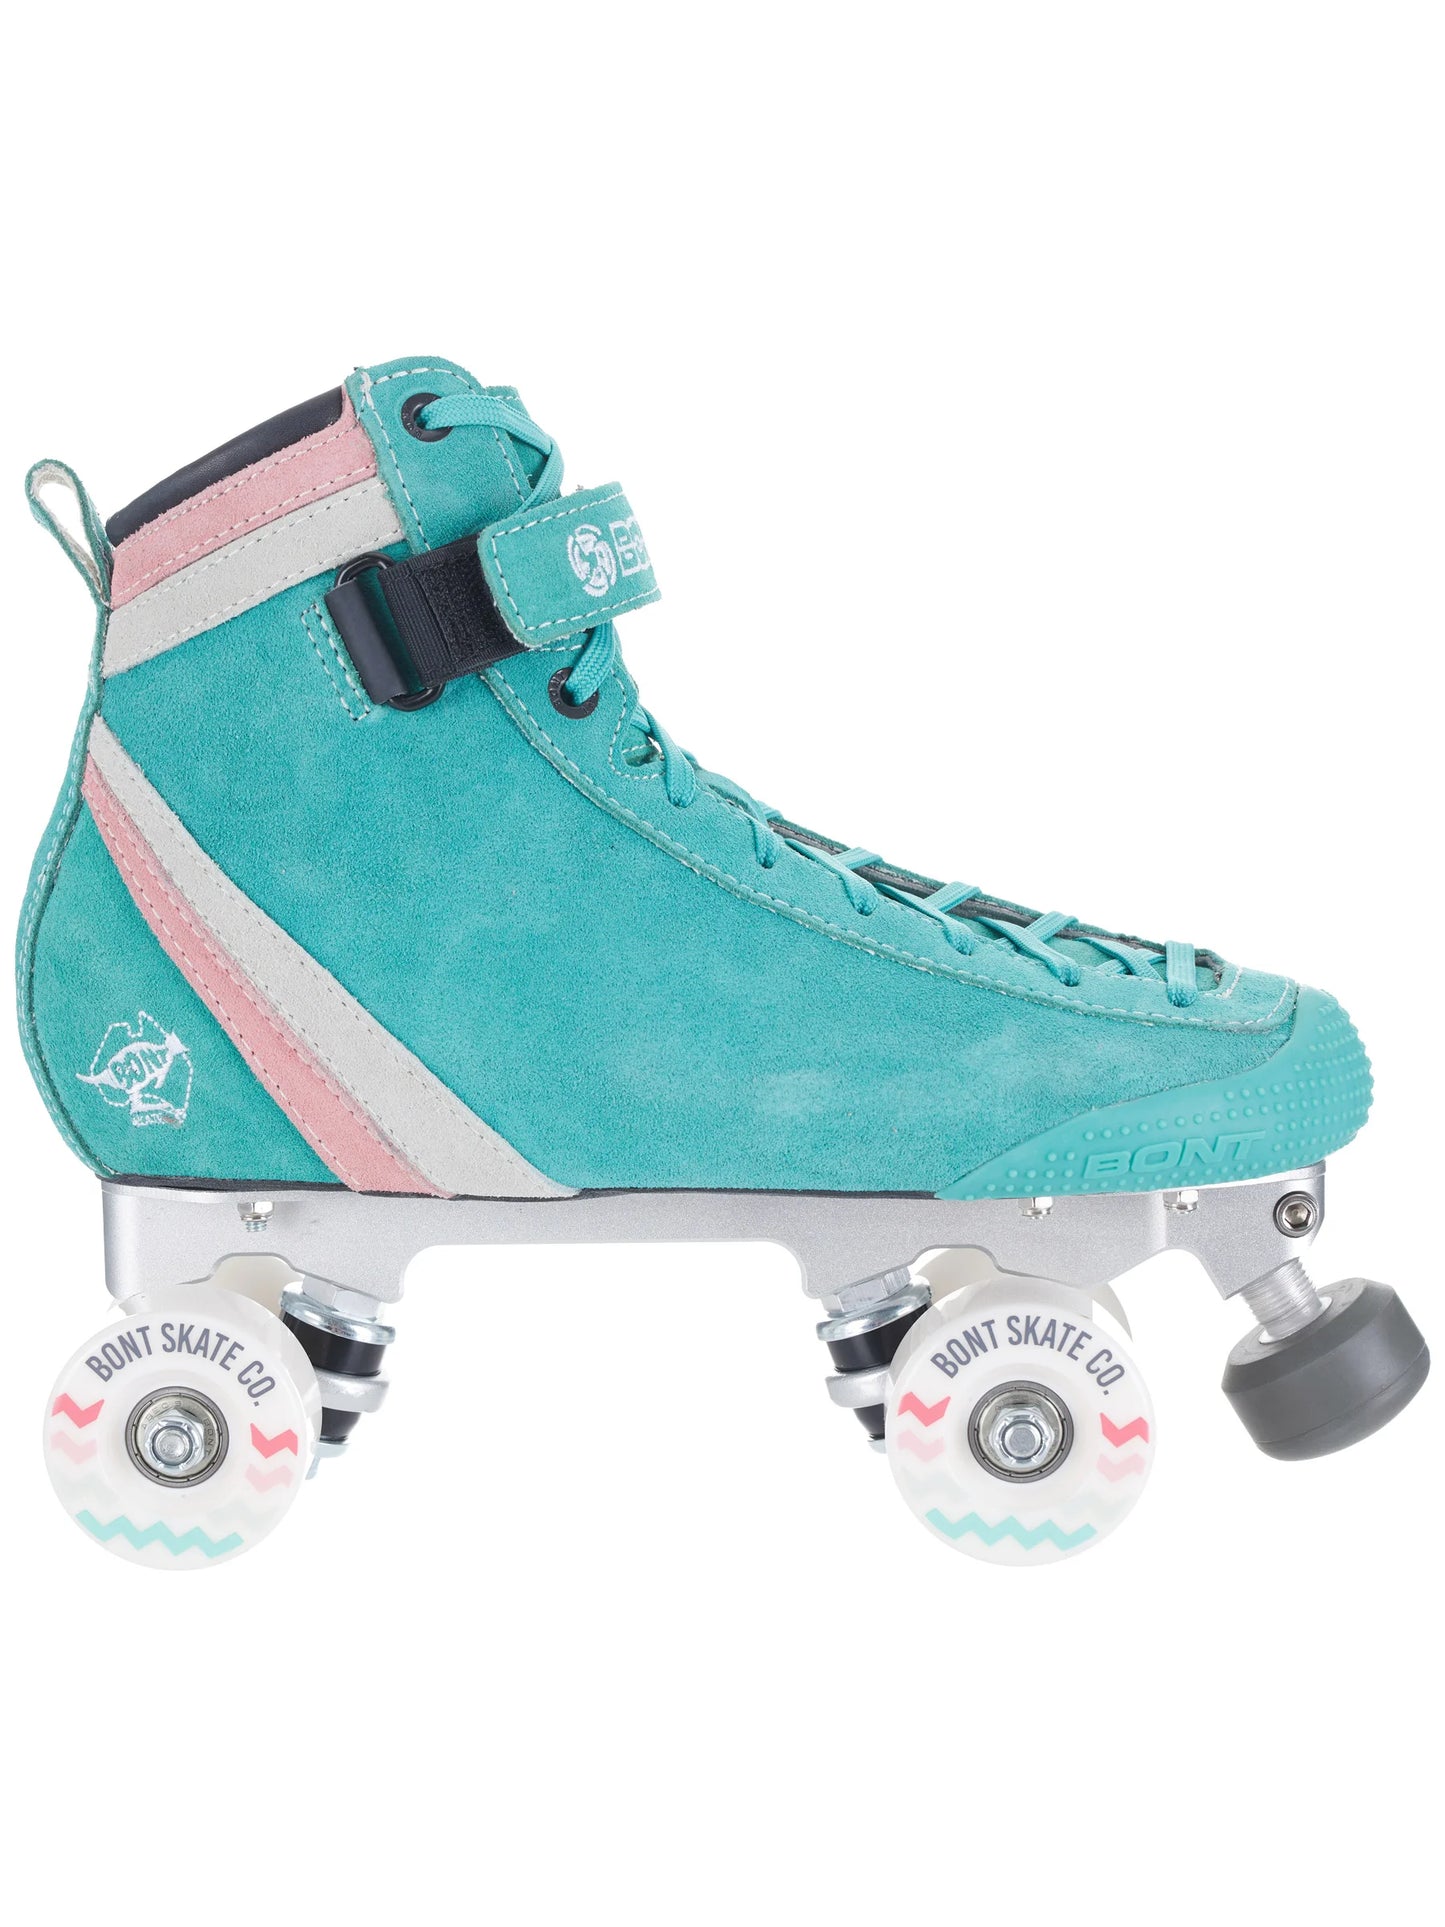 Bont parkstar roller skates are in Las Vegas. Stop by Fresas Skate Shop and try these skates on. You will fall in love with this Teal with a hint of Pink color skates. Let's Roll around Downtown Las Vegas.